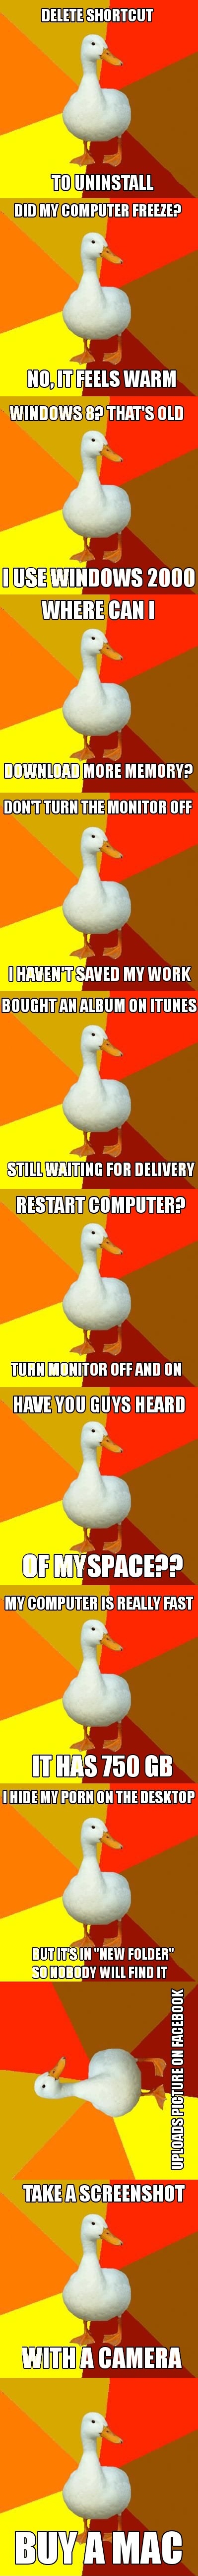 Technologically impaired duck is back!